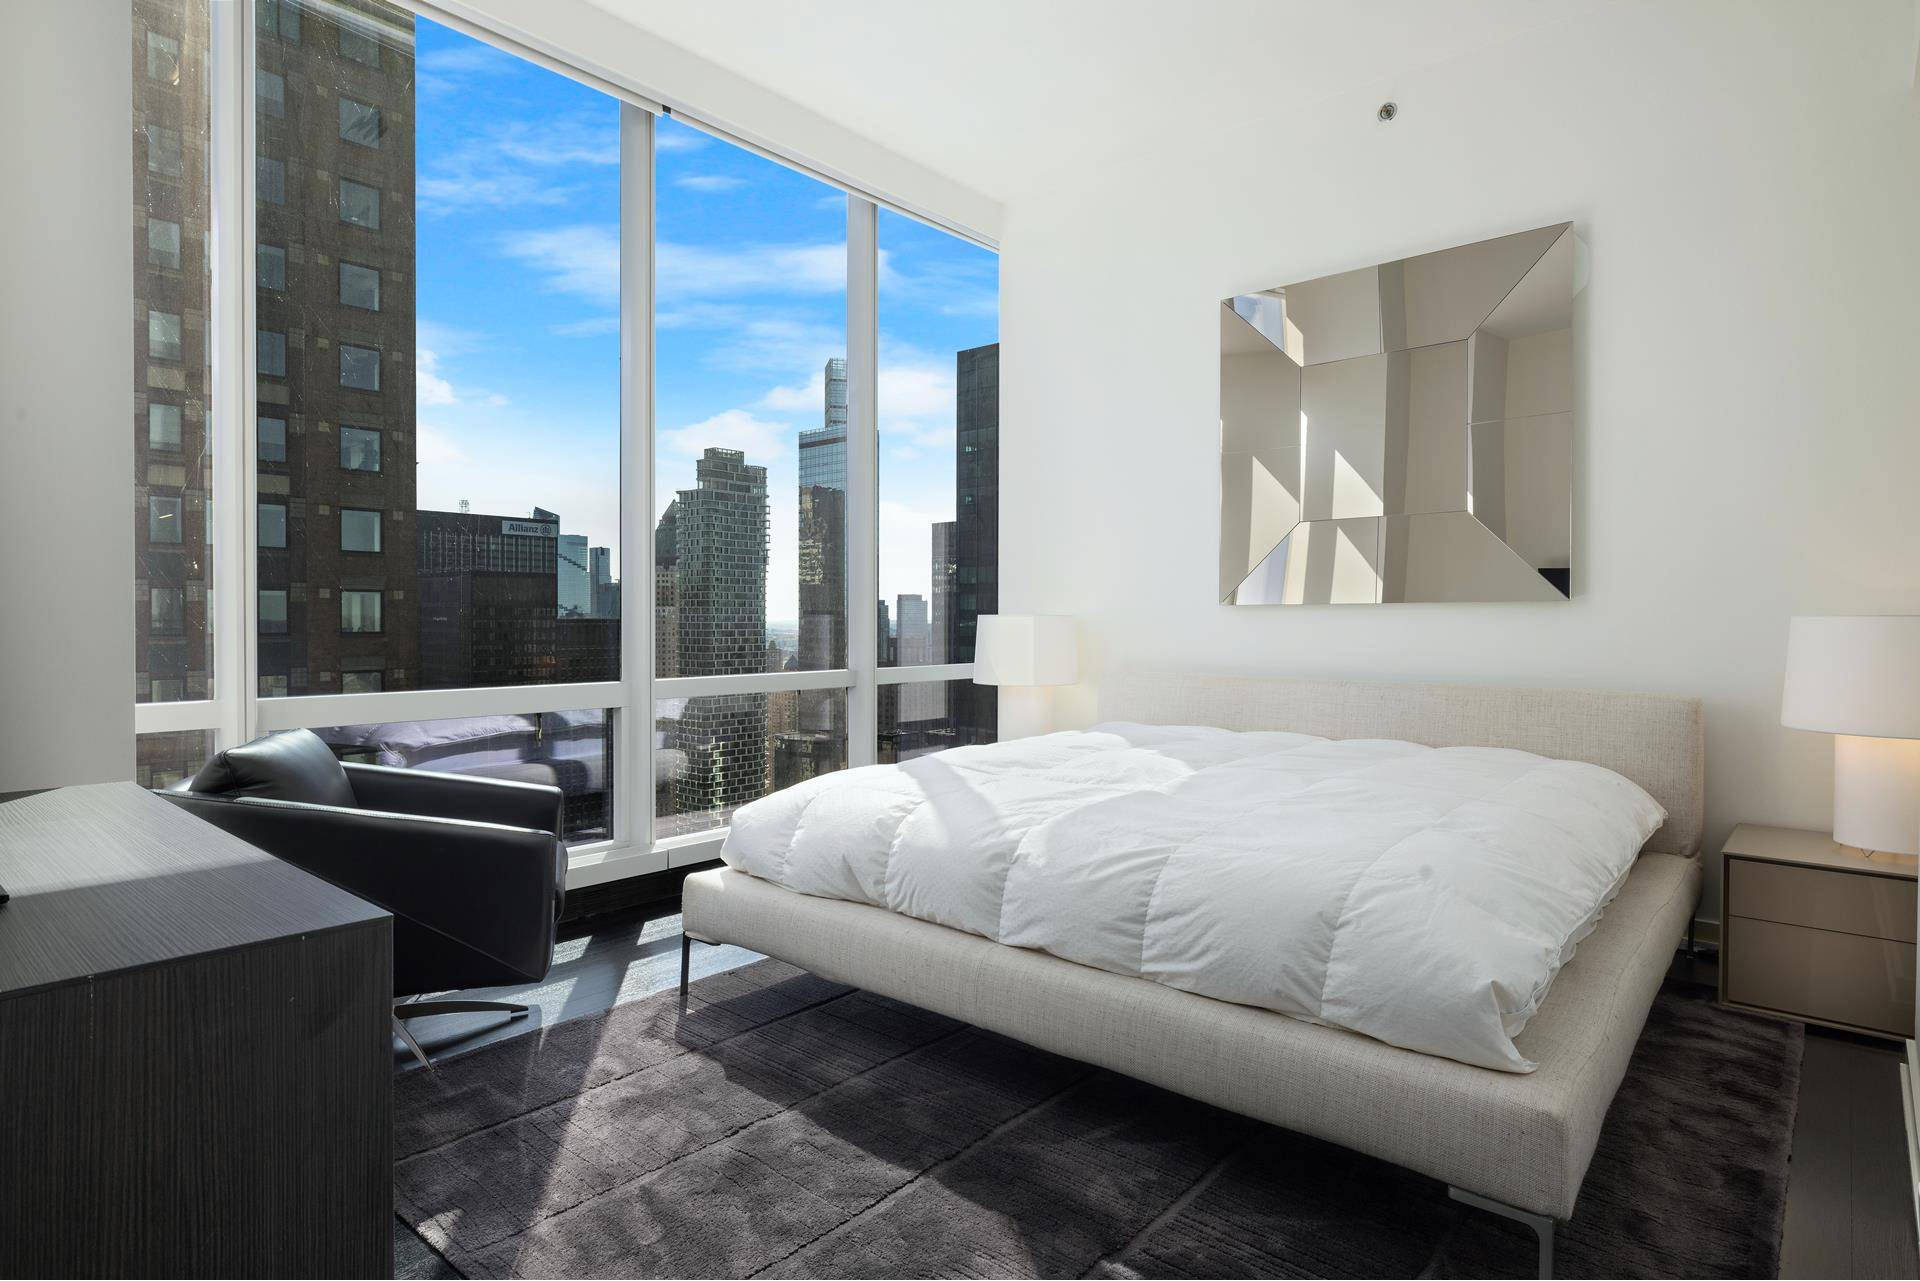 A Masterpiece in the SkyResidence 49C at One57 showcases breathtaking Central Park and dazzling NYC Skyline Views with Ultra High Ceilings throughout.